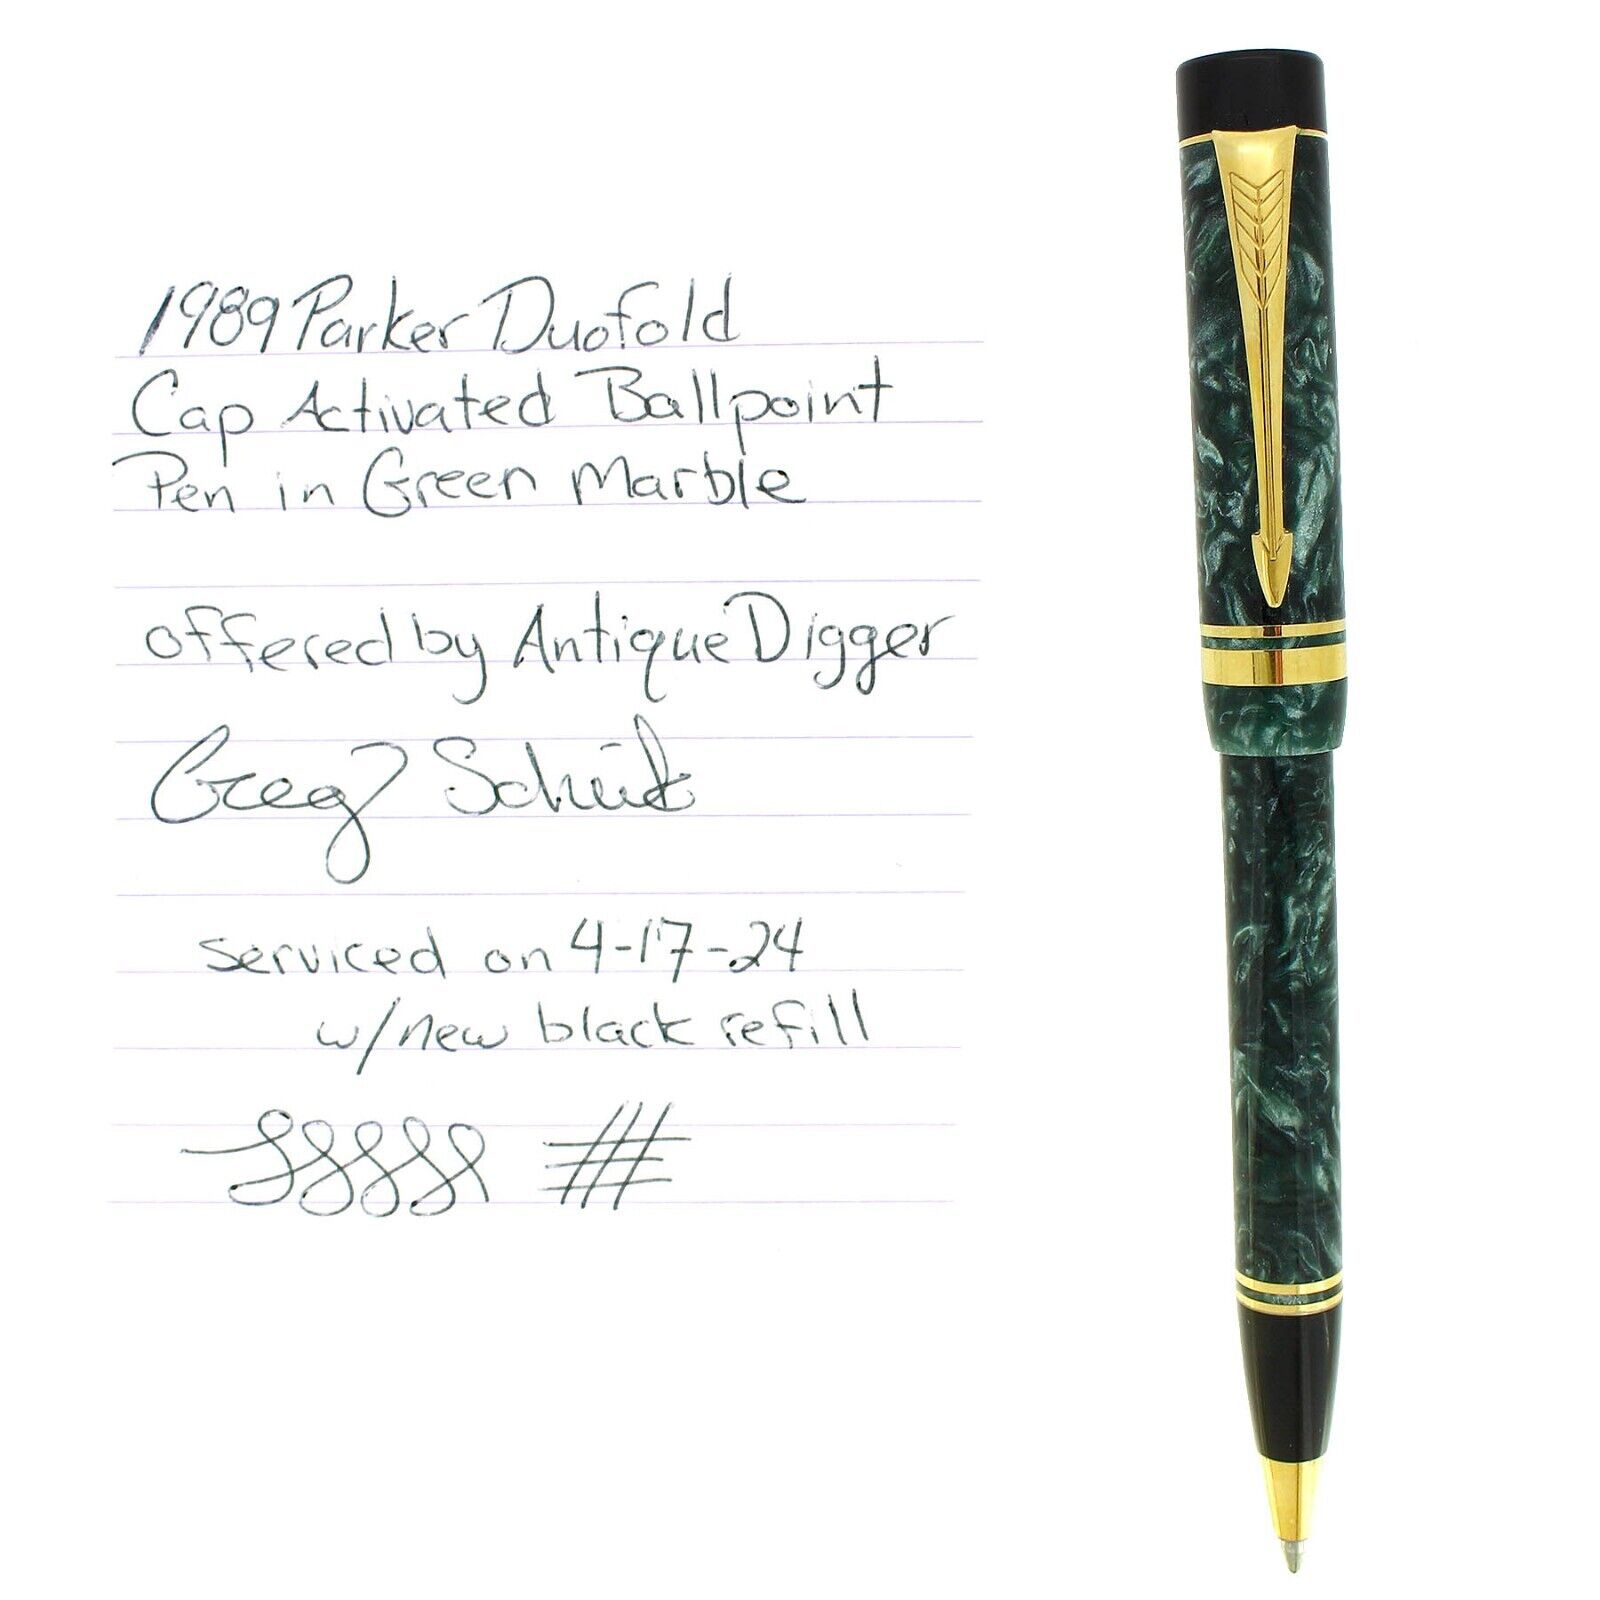 1989 PARKER DUOFOLD GREEN MARBLE CAP ACTIVATED BALLPOINT PEN NEAR MINT